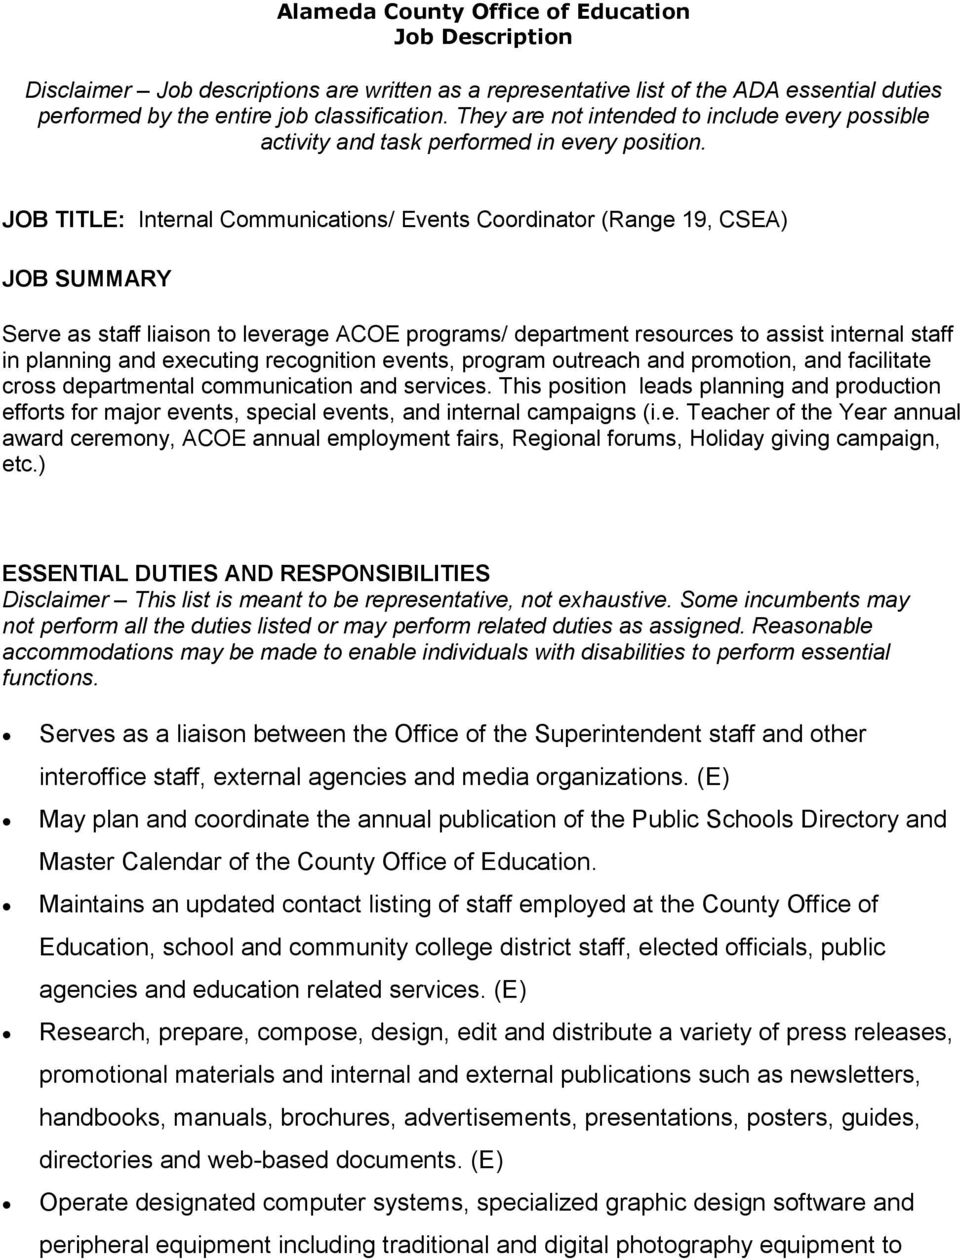 JOB TITLE: Internal Communications/ Events Coordinator (Range 19, CSEA) JOB SUMMARY Serve as staff liaison to leverage ACOE programs/ department resources to assist internal staff in planning and